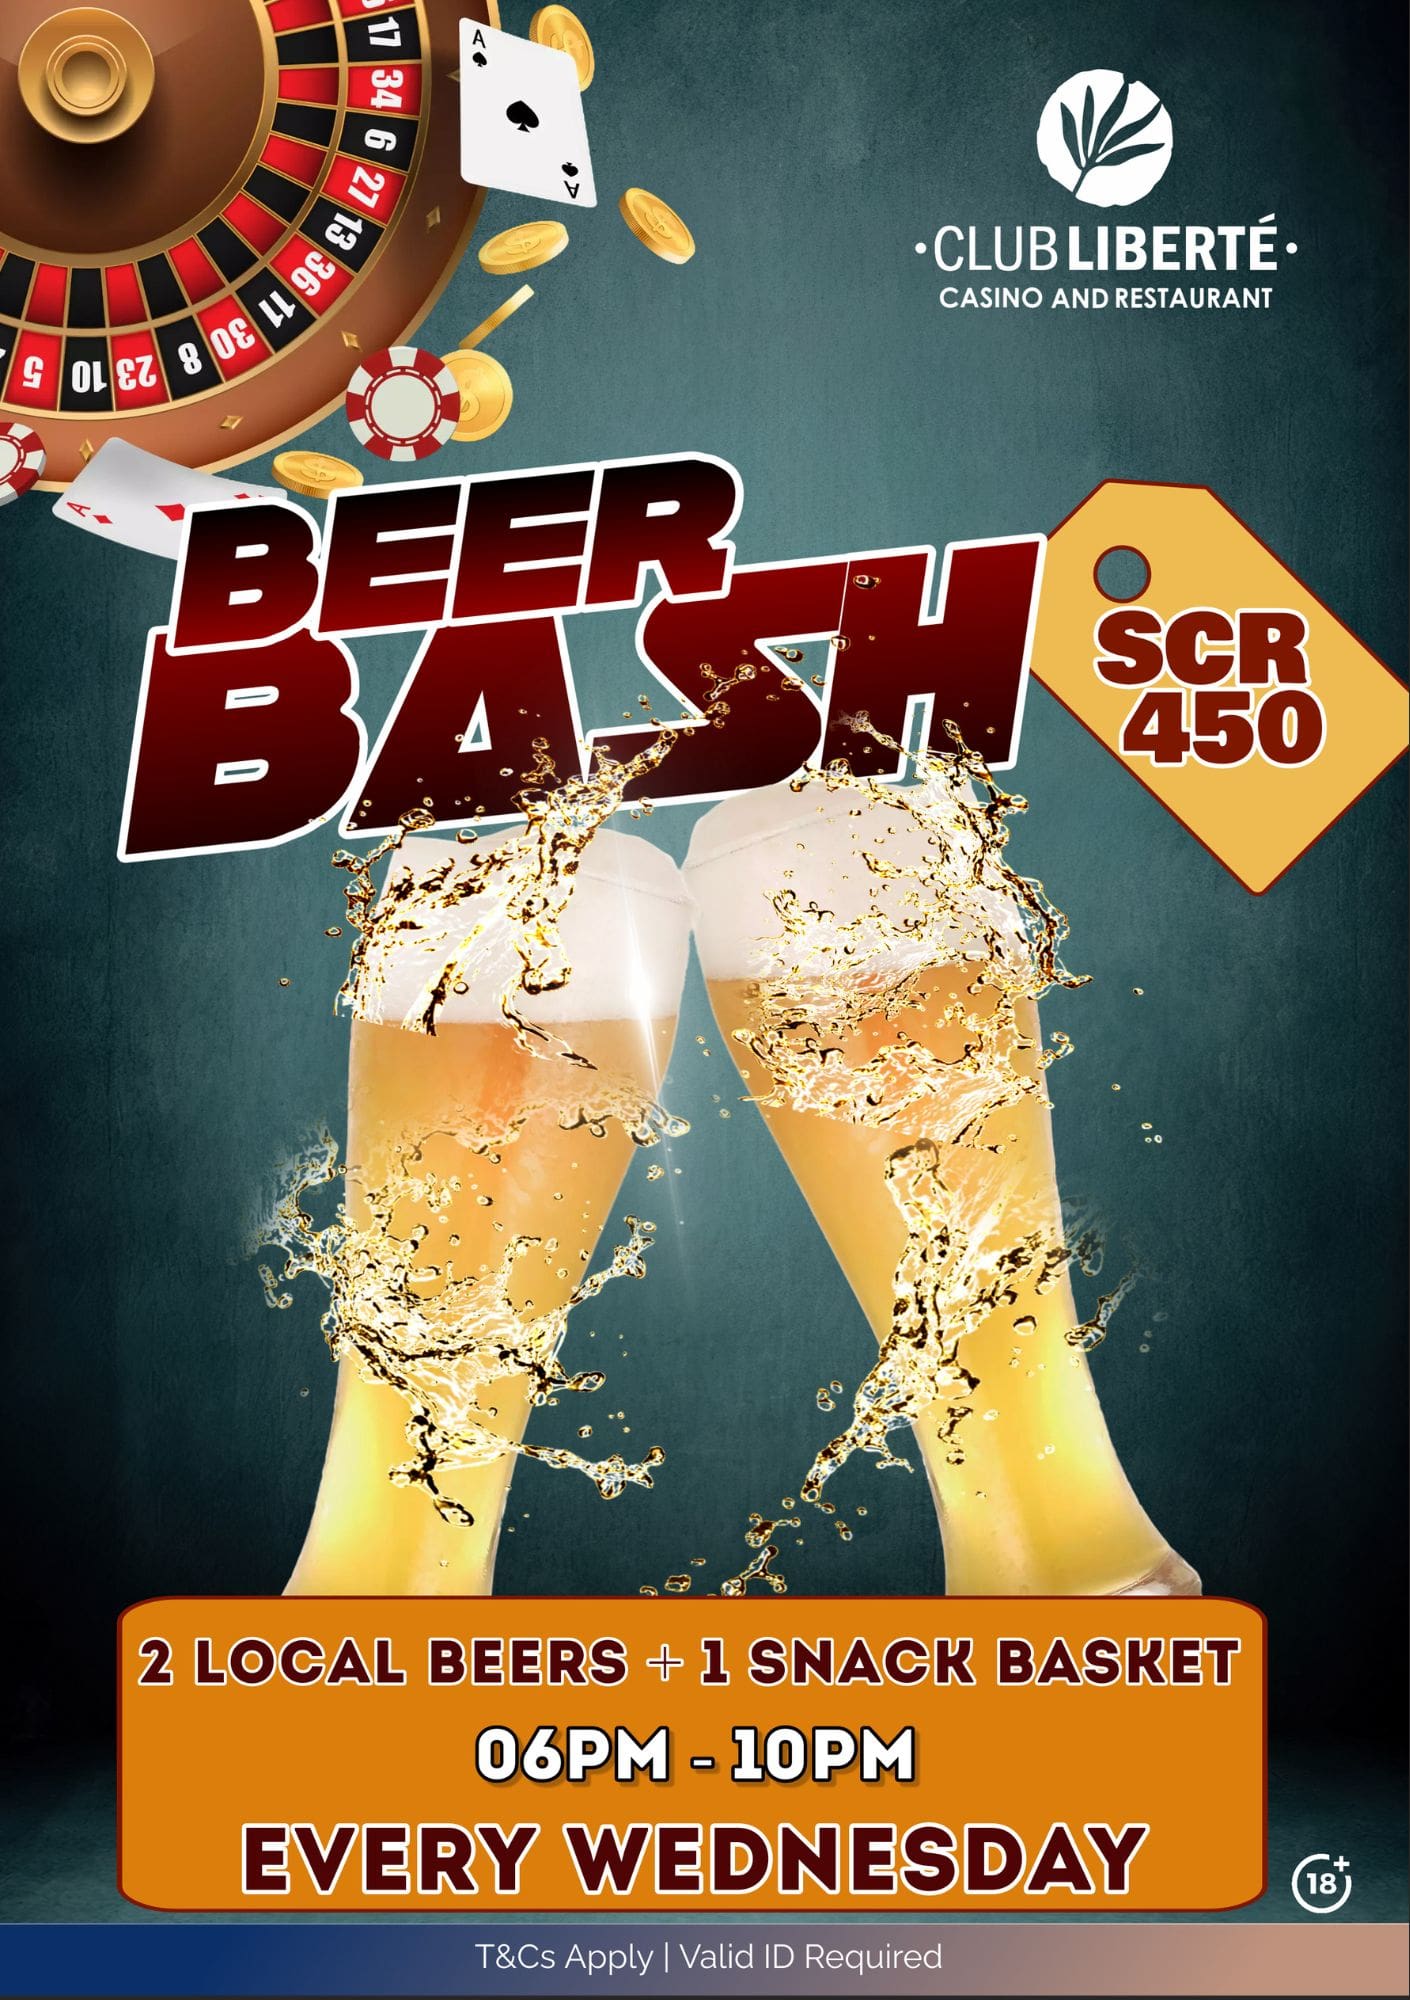 Beer Bash special - Seychelles